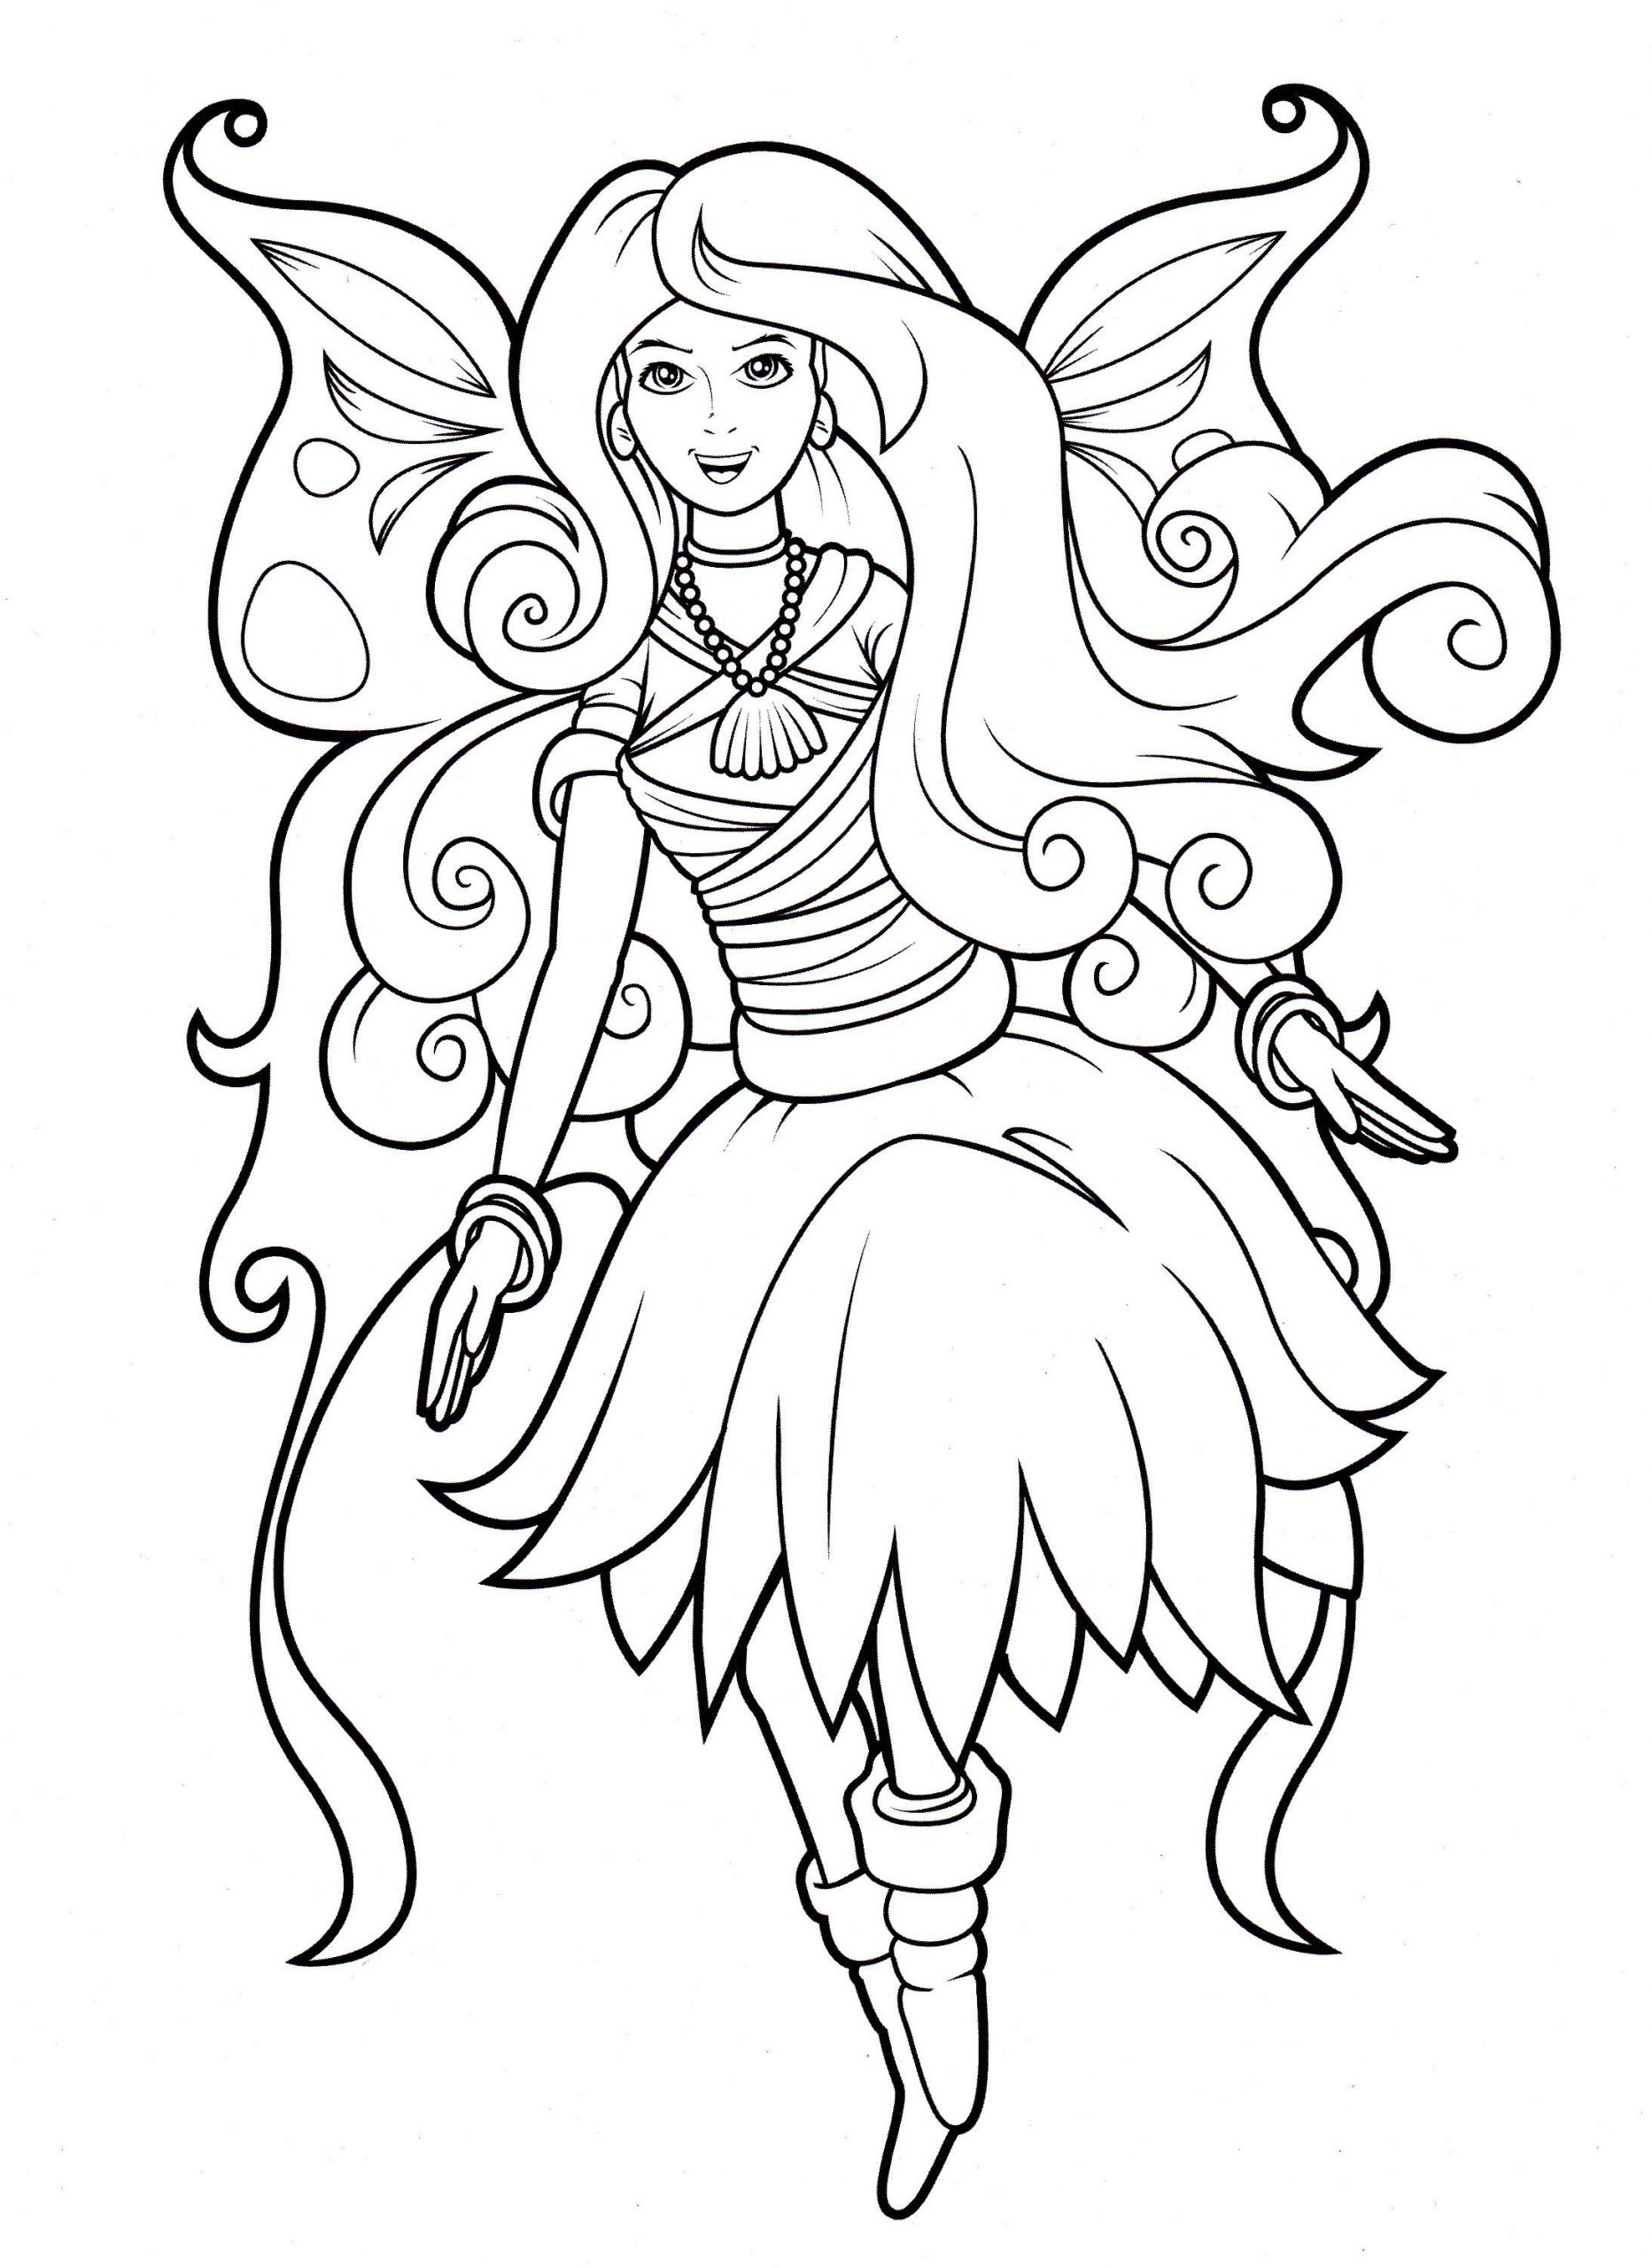 Coloring Pages For Girls Fairies
 Fairy from Lilly Butterfly coloring book